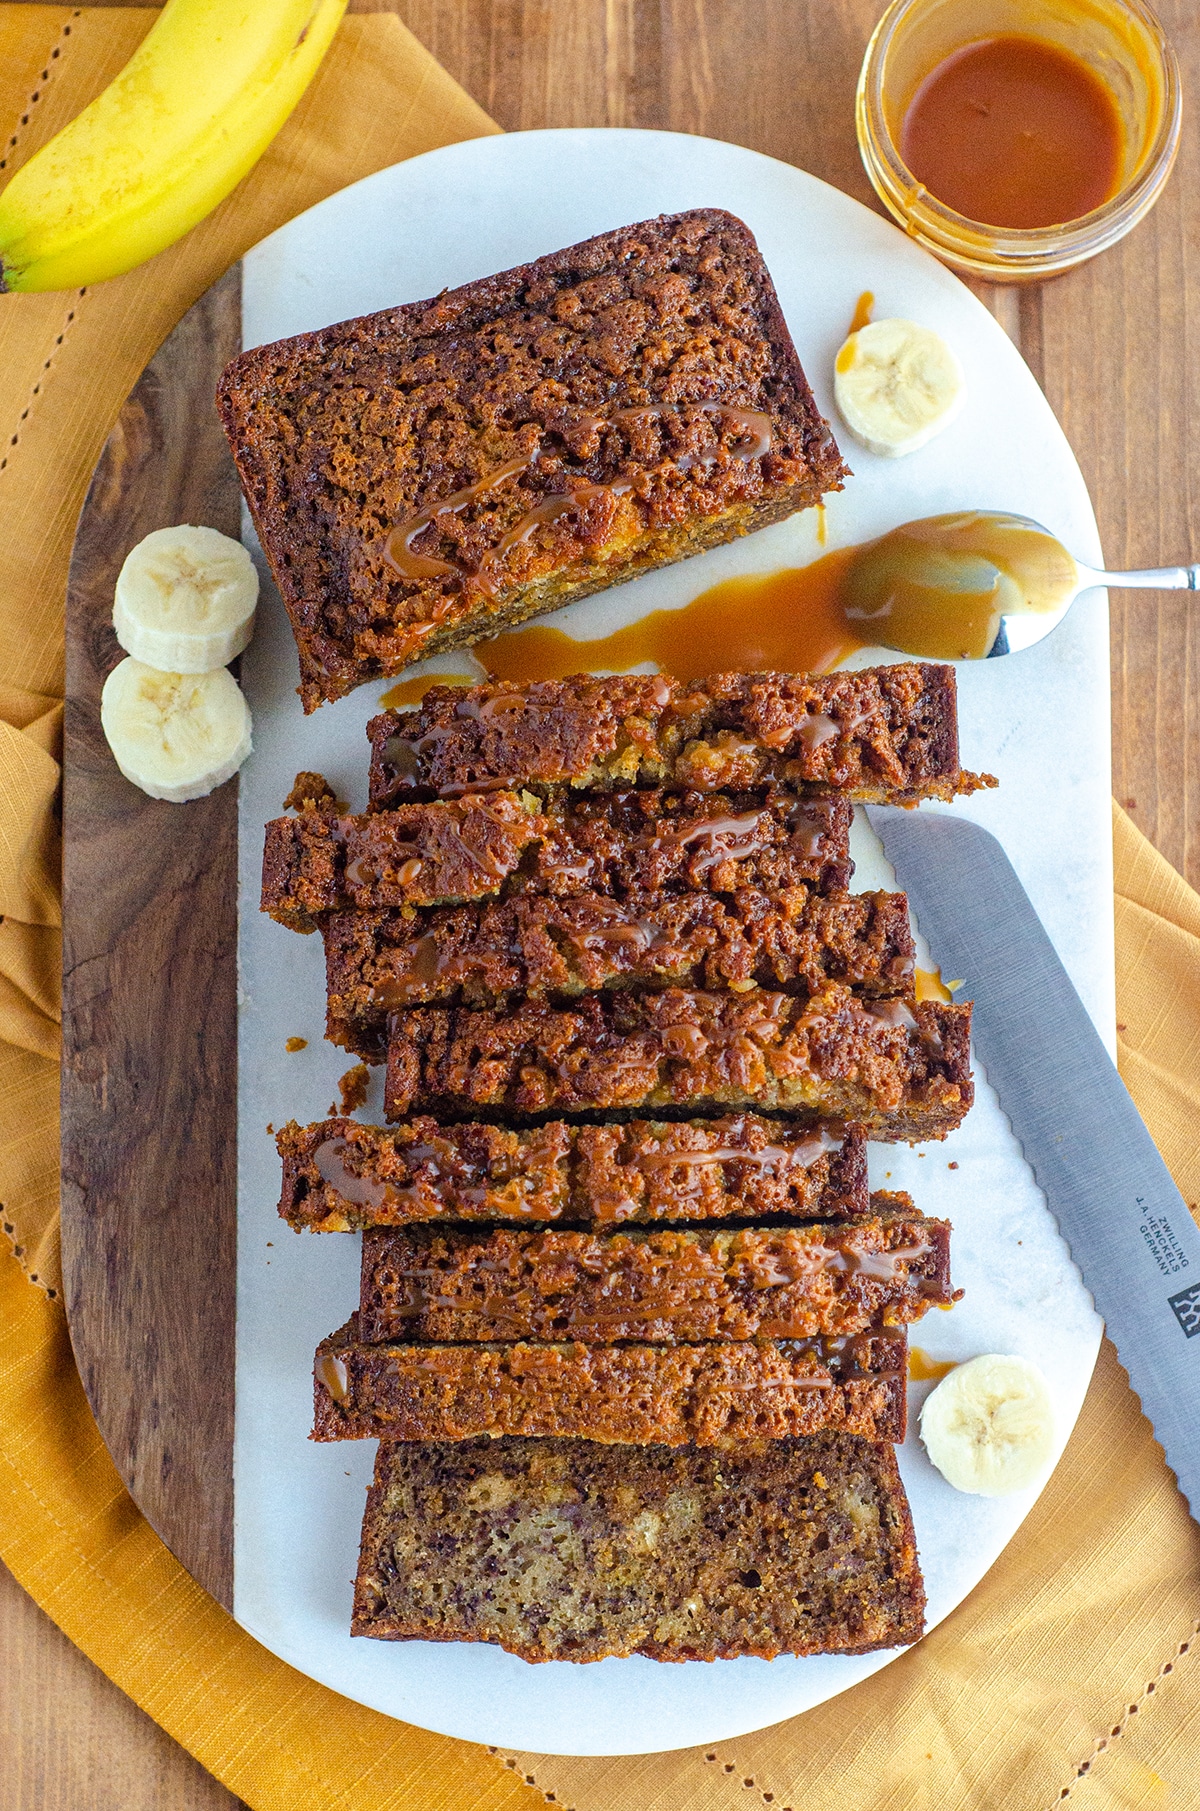 Classic banana bread gets swirled with salted bourbon caramel sauce for a jazzy take on the original. via @frshaprilflours